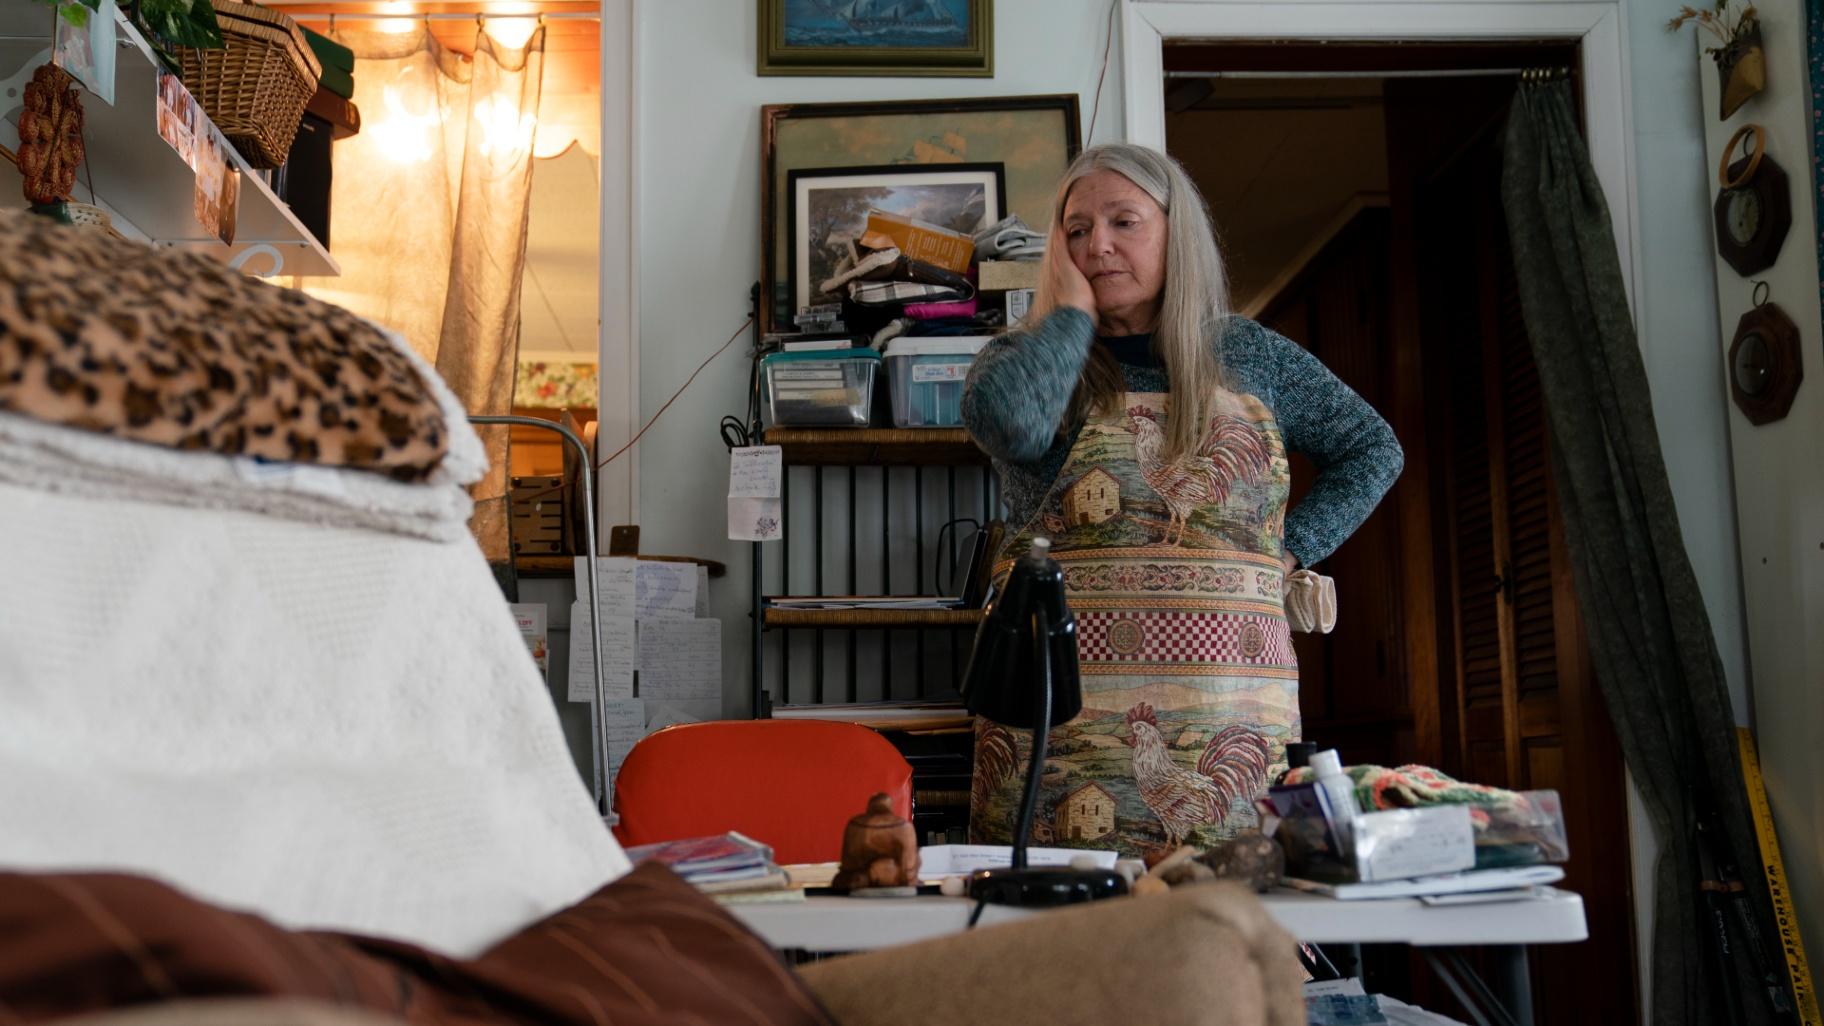 FILE - Nancy Rose, who contracted COVID-19 in 2021 and exhibits long-haul symptoms including brain fog and memory difficulties, pauses while organizing her desk space, Tuesday, Jan. 25, 2022, in Port Jefferson, N.Y. Rose, 67, said many of her symptoms waned after she got vaccinated, though she still has bouts of fatigue and memory loss. (John Minchillo / AP Photo, File)